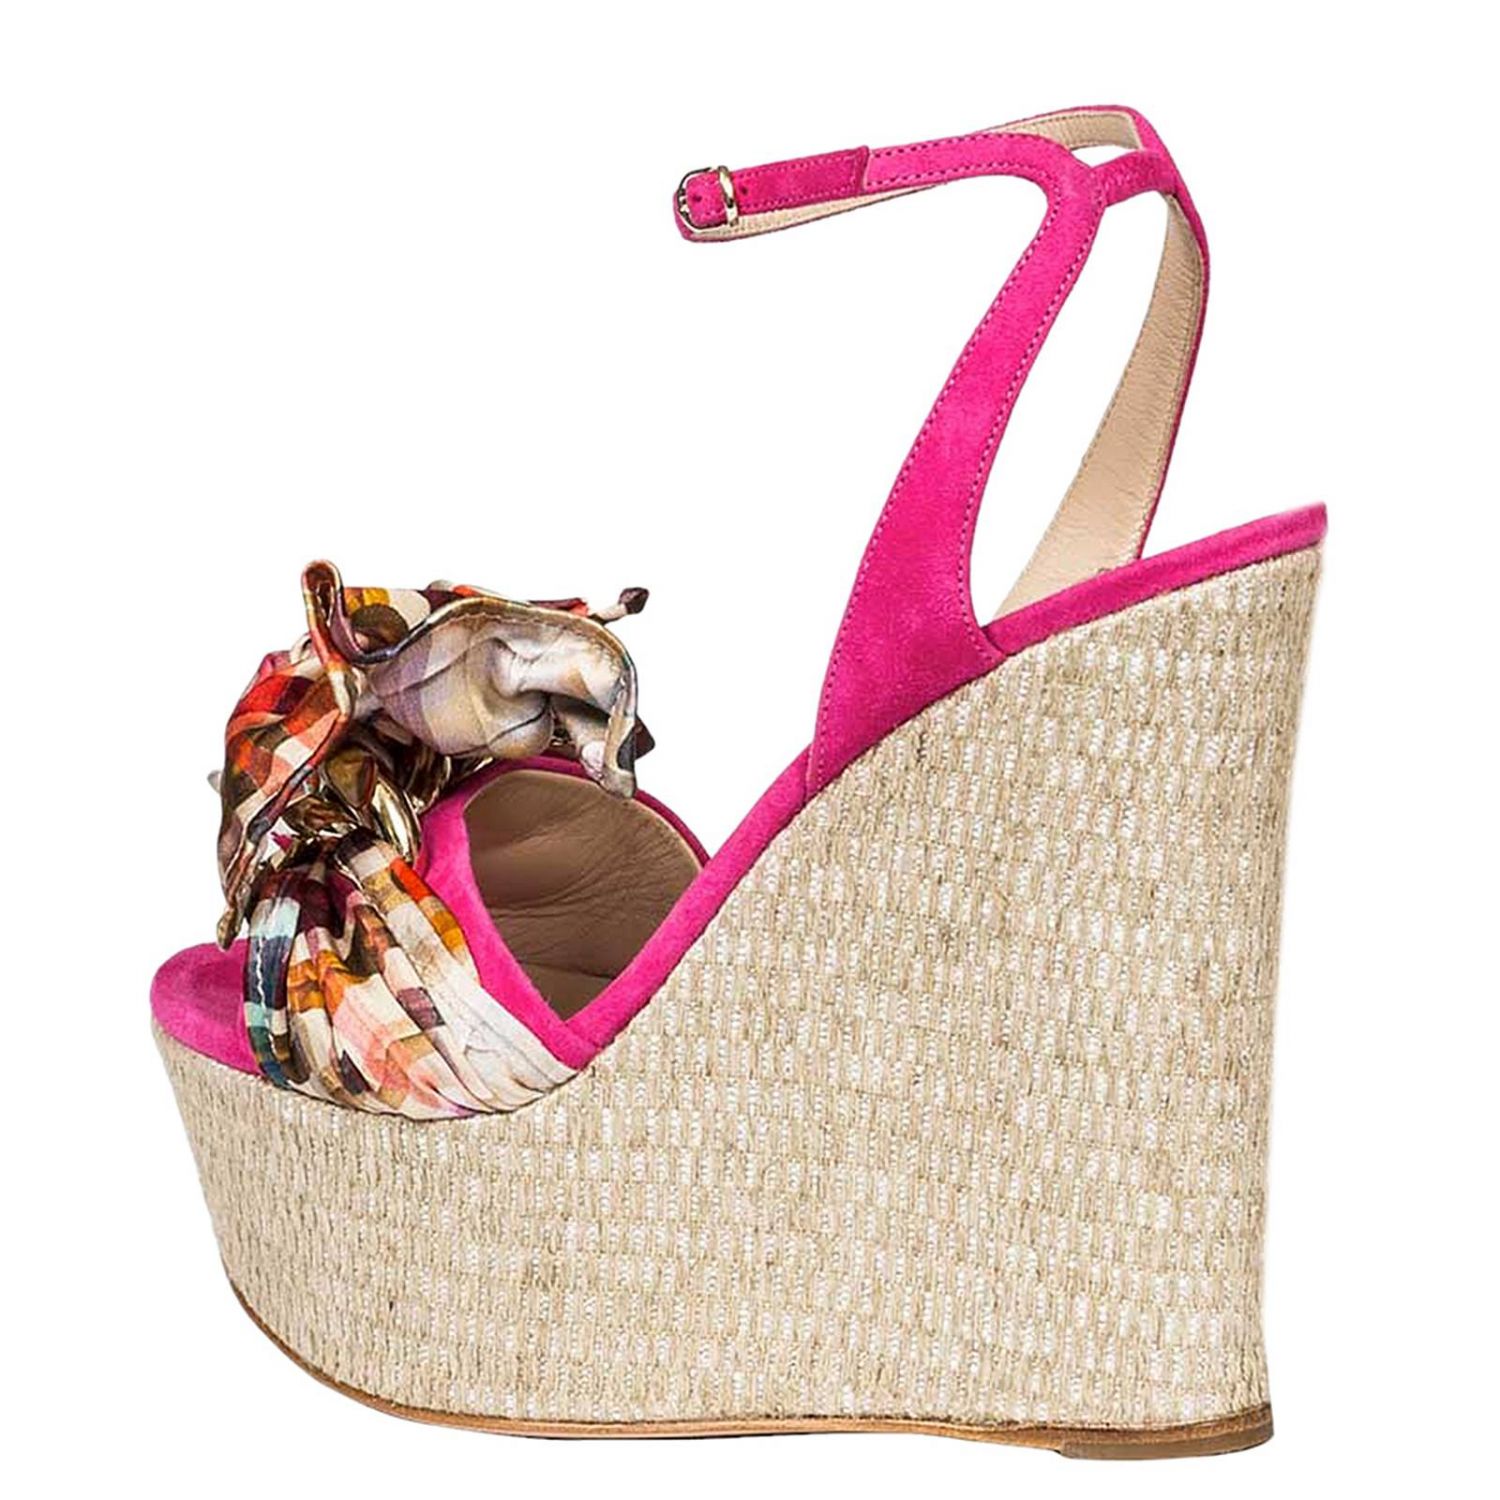 Casadei Outlet: Wedge shoes women - Pink | Wedge Shoes Casadei ...